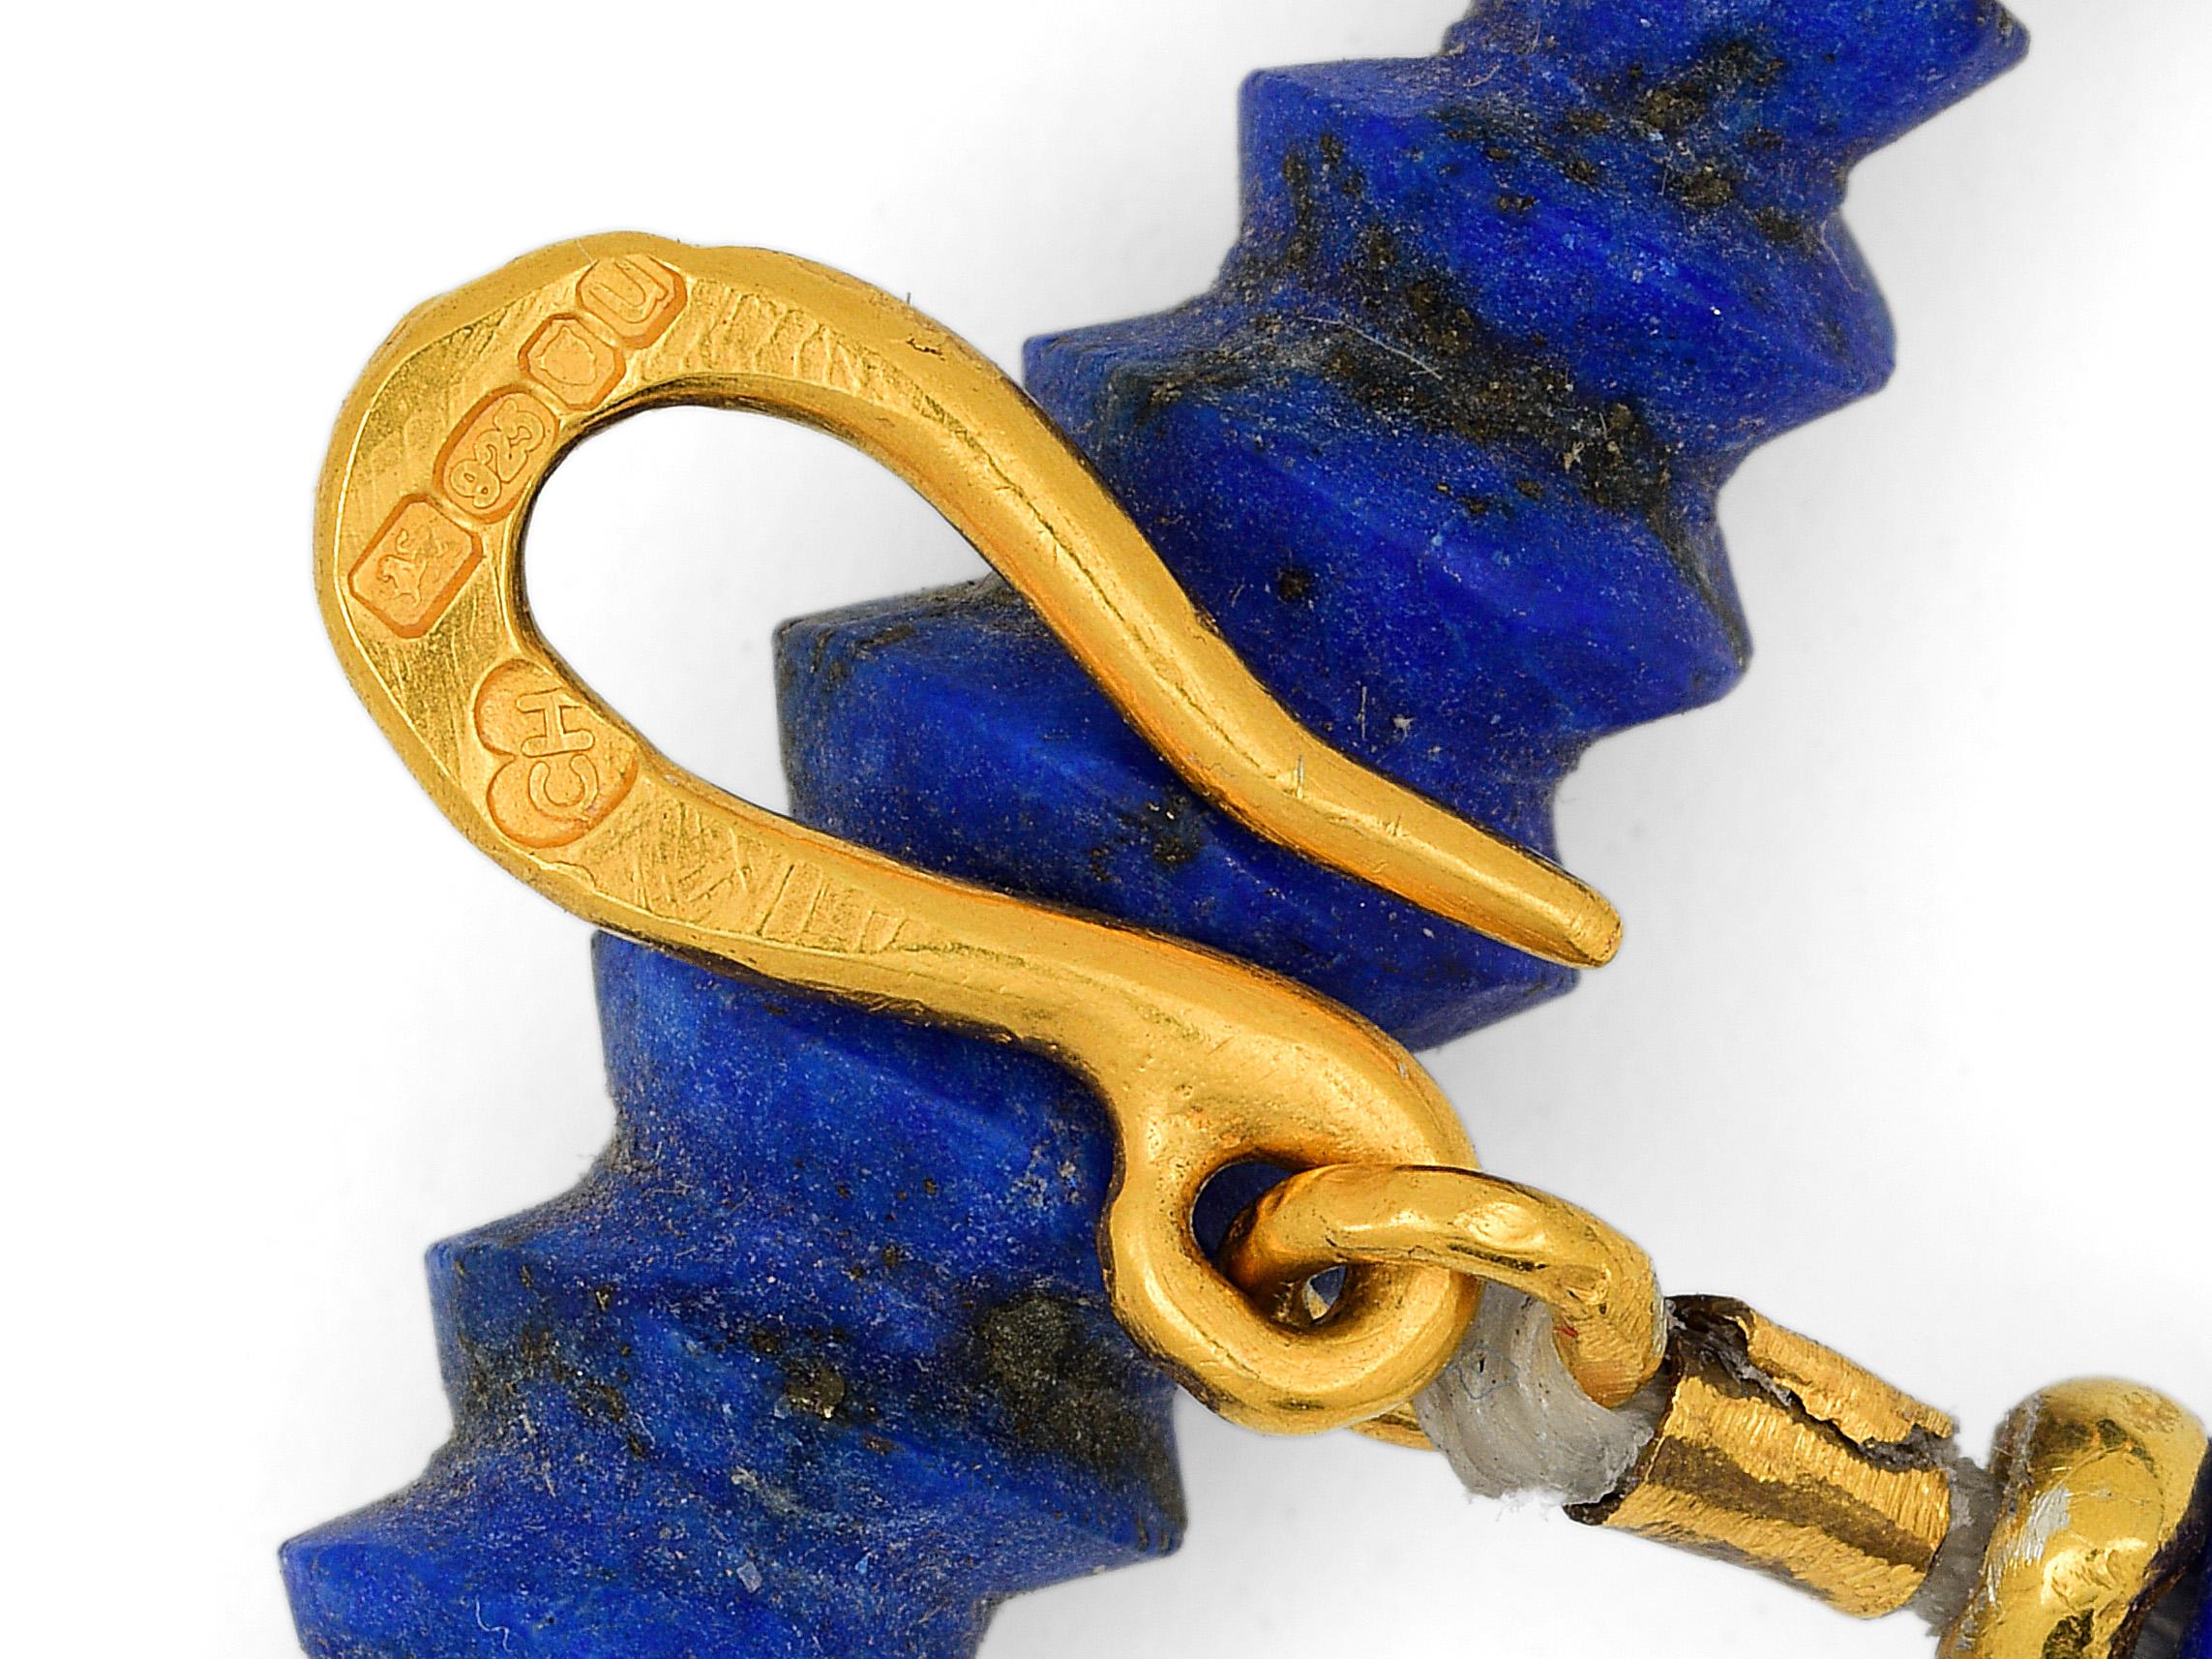 Ancient looking handcrafted lapis lazuli necklace with gold vermeil beads. The lapis beads are a vibrant blue, three of which are very special with hand-carved detail. Most of the metal beads have been made by hand as well as the s-clasp which is